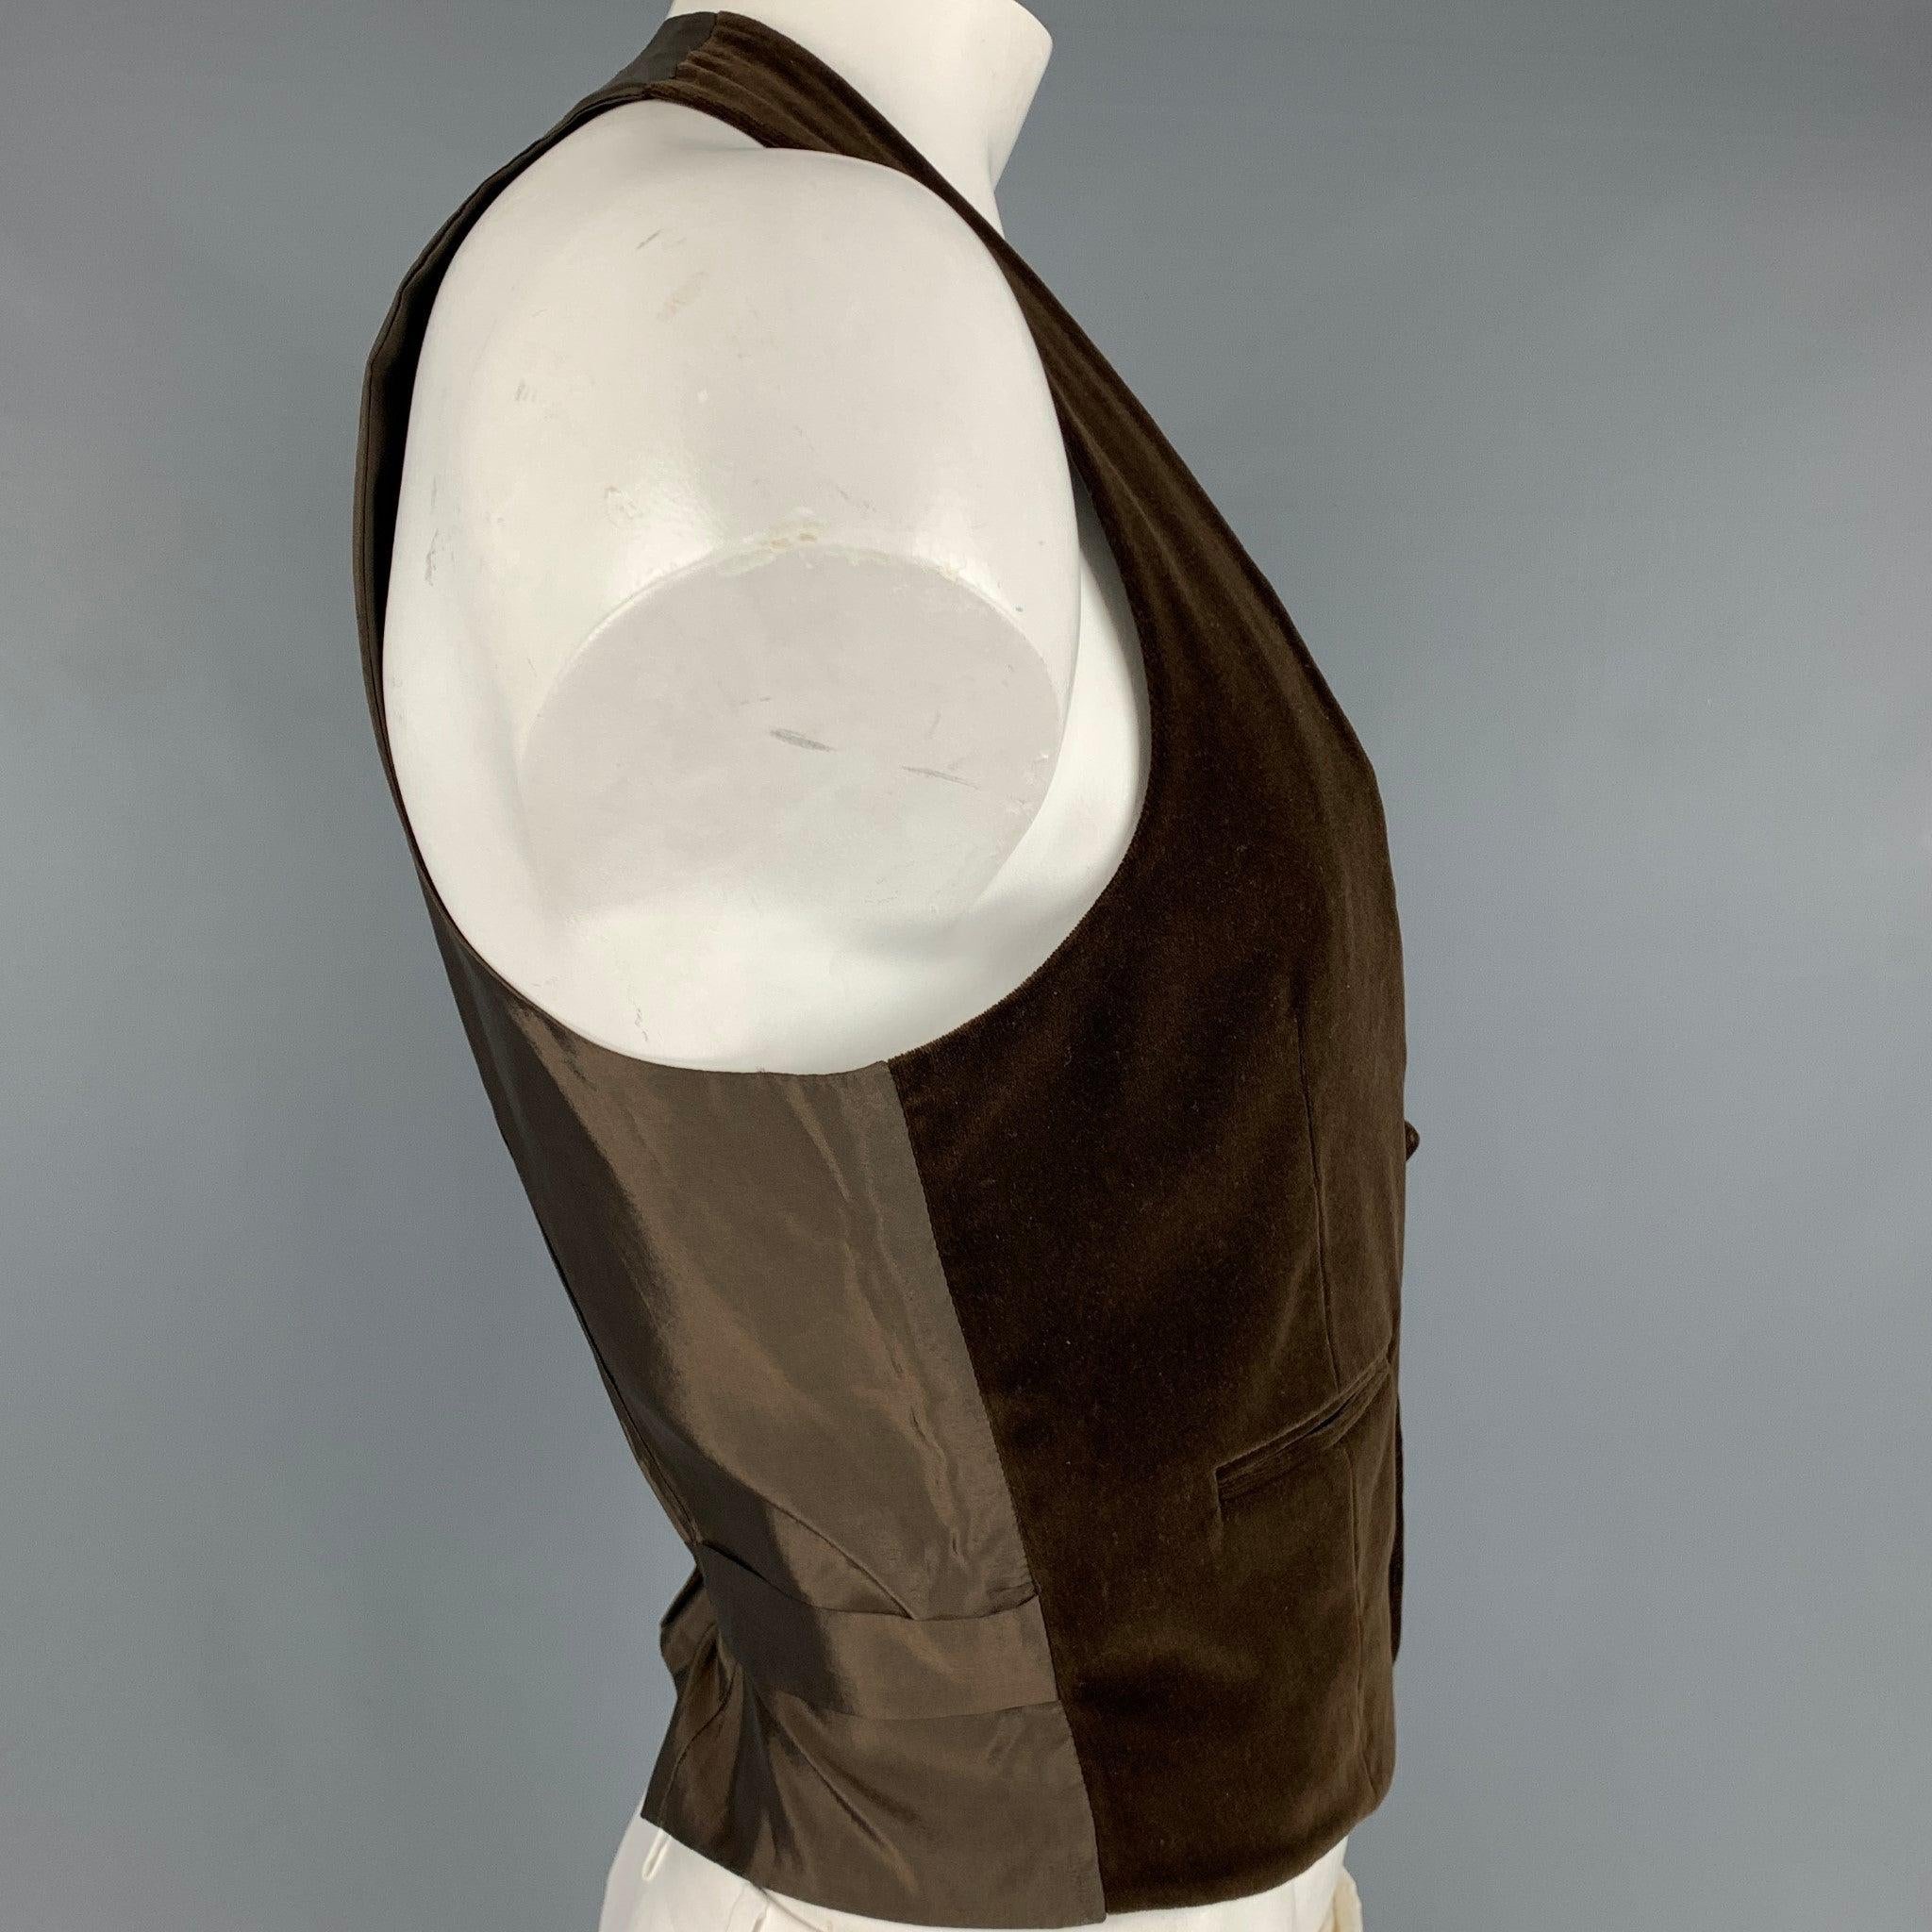 GIORGIO ARMANI vest
in a brown cotton fabric featuring velvet texture, two pockets, and a button closure. Made in Italy.Excellent Pre-Owned Condition. 

Marked:   54 

Measurements: 
 
Shoulder: 12.5 inches Chest: 44 inches Length: 22 inches 
  
  
